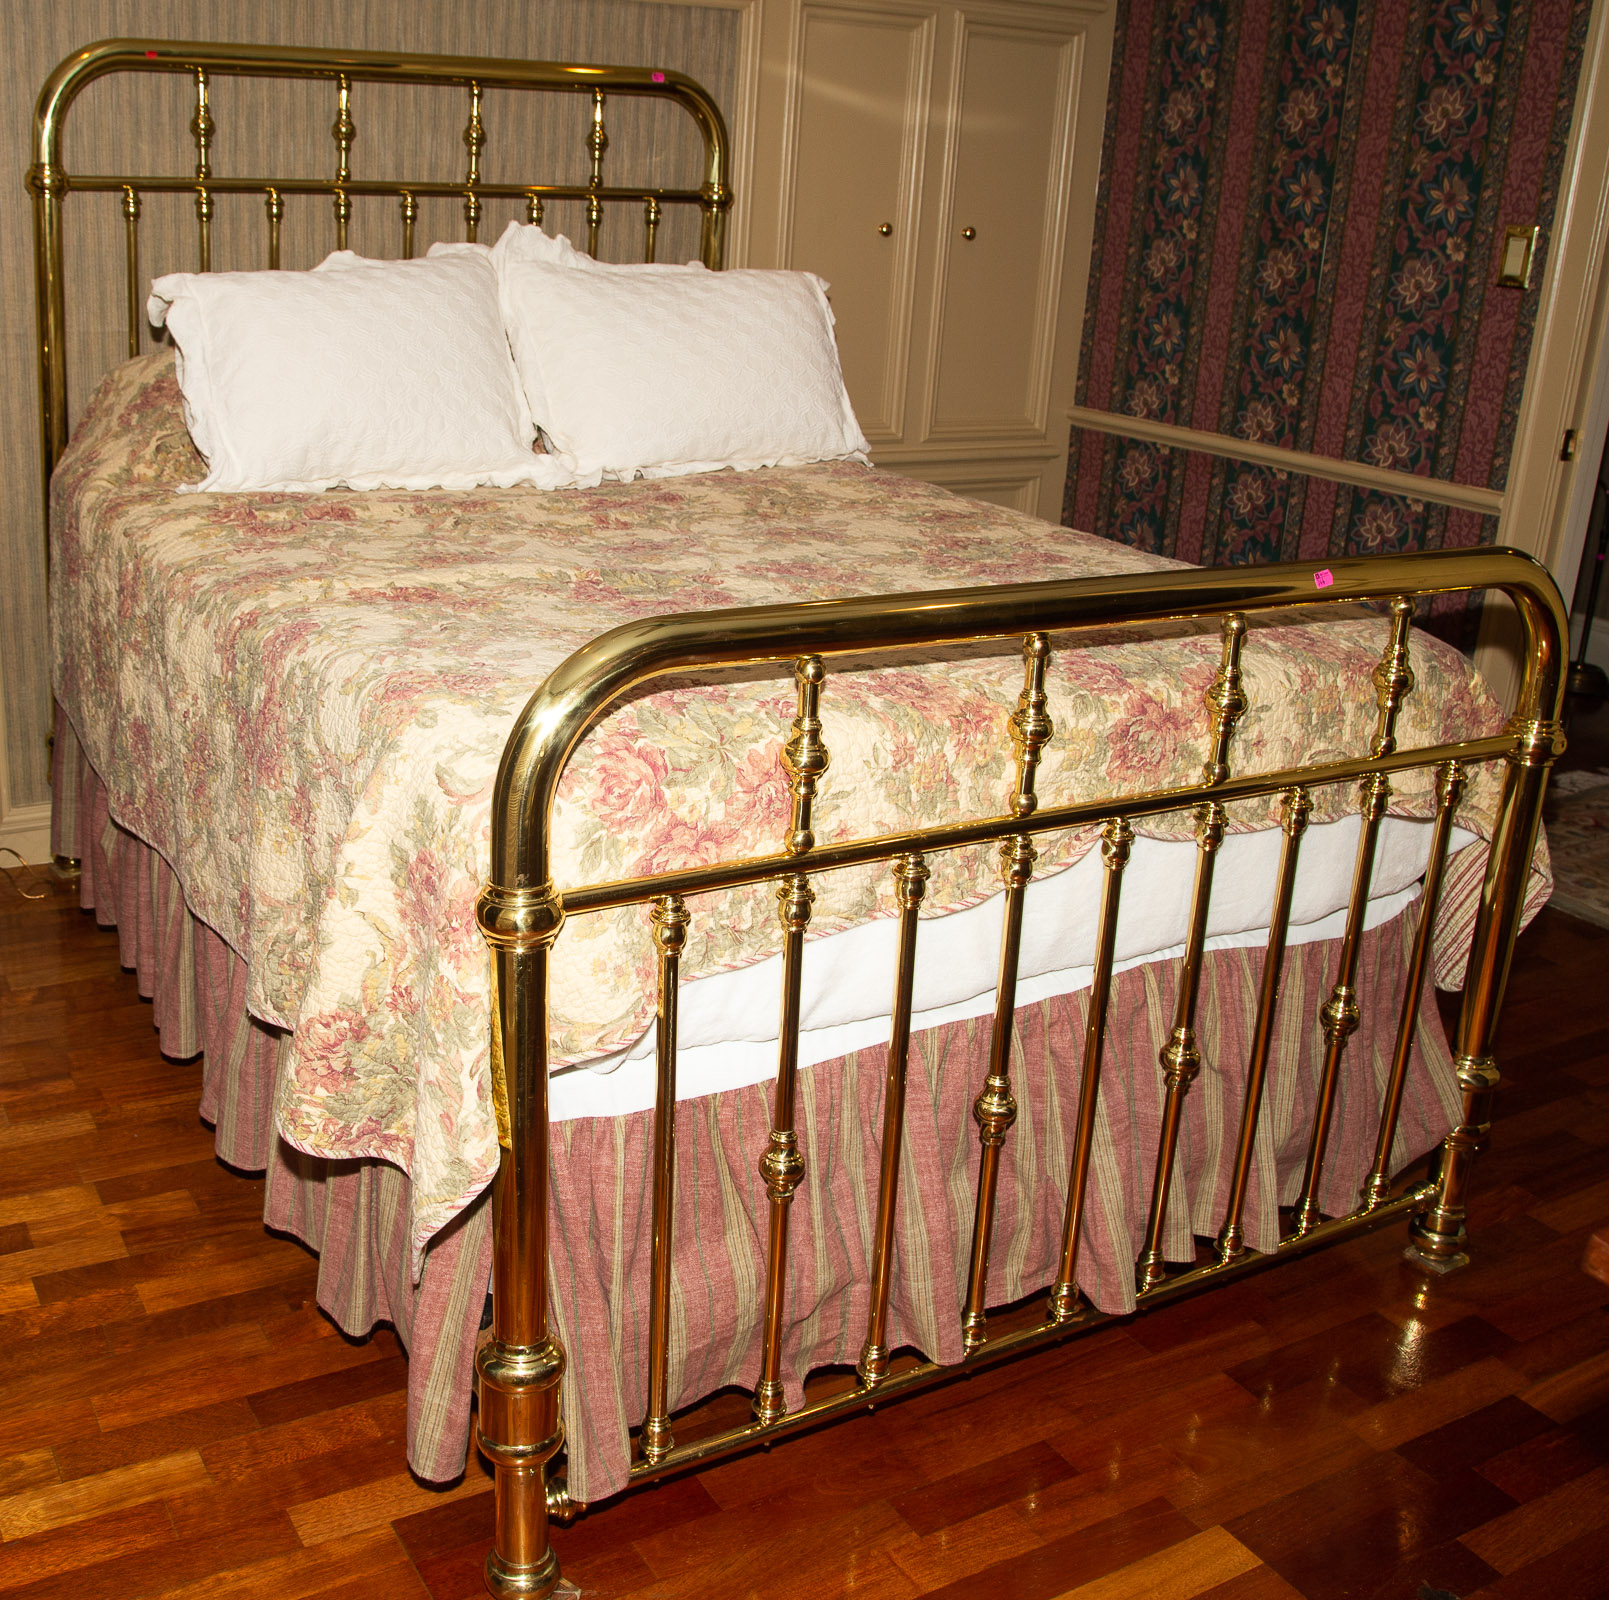 A BRASS BED BUTLERS CHEST Full 36a2df